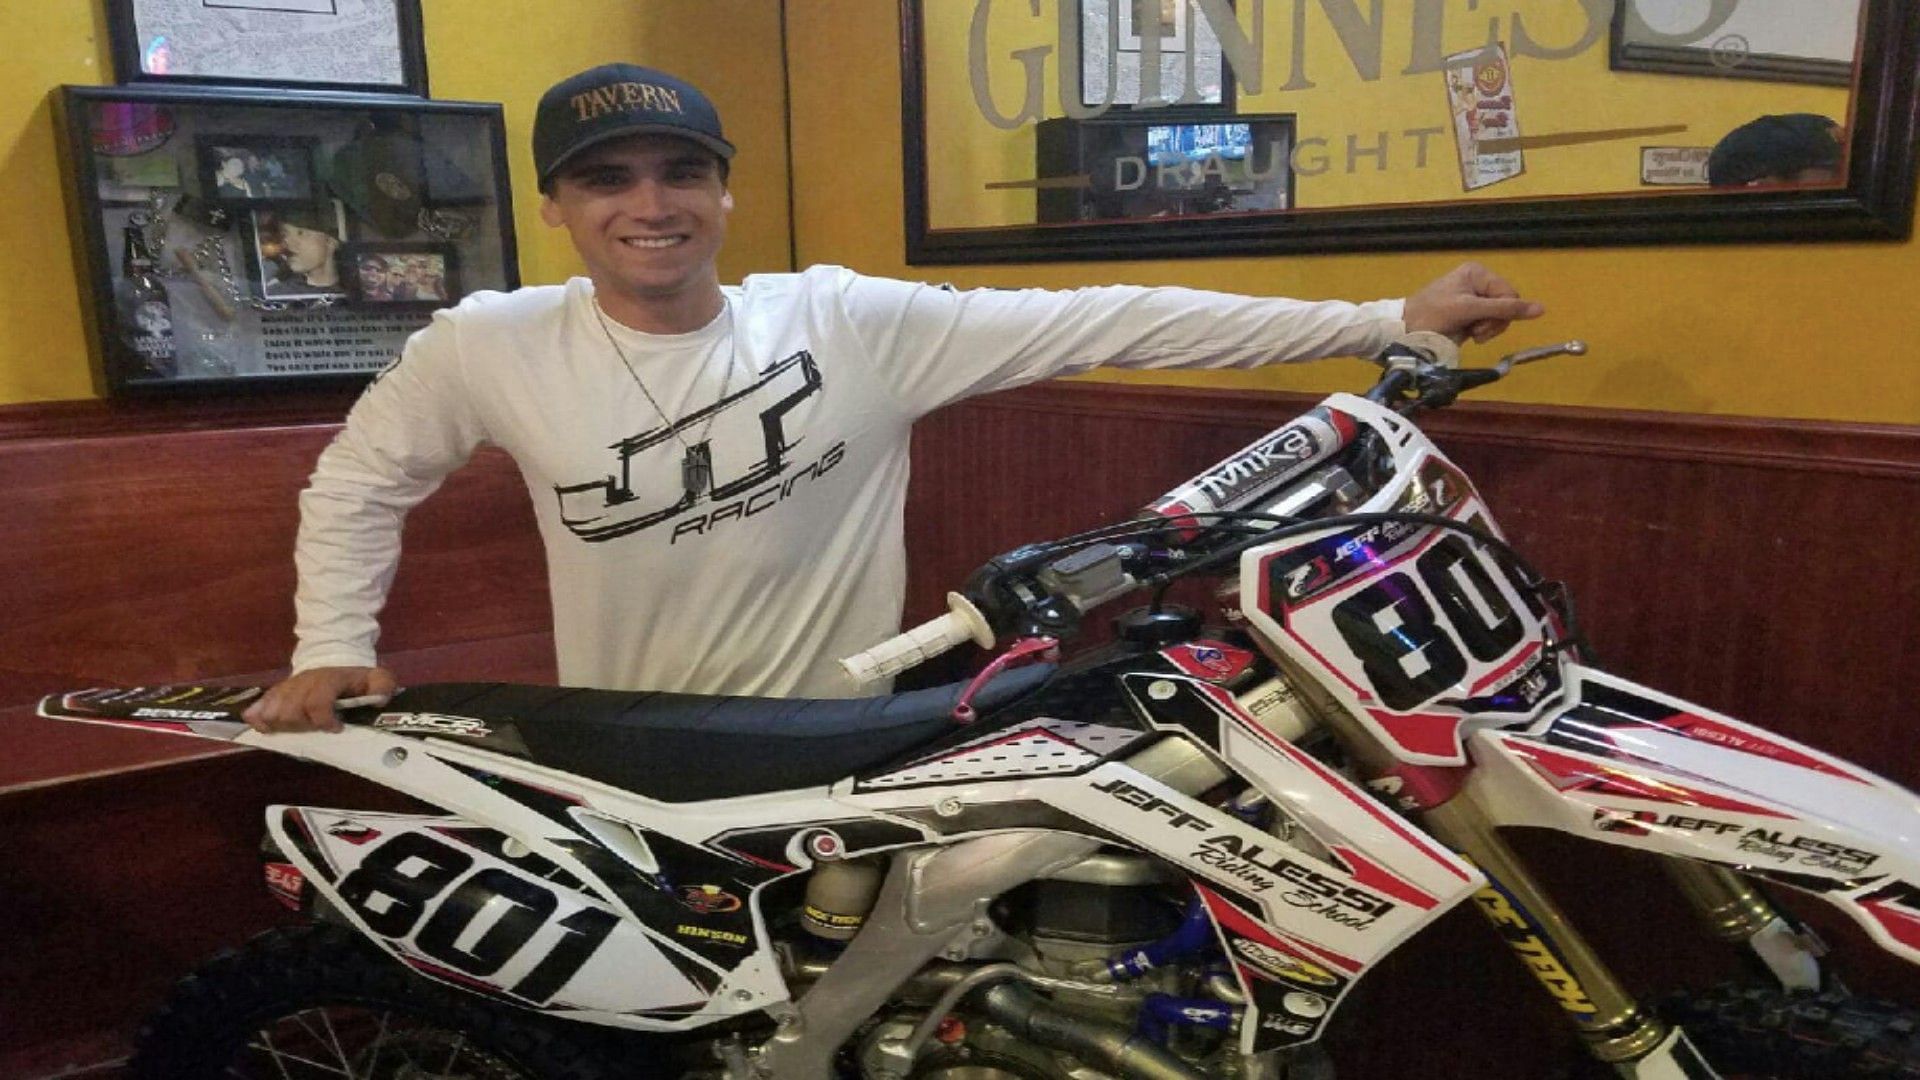 So young: Jeff Alessi heart attack claim explored in wake of Supercross  racer's death at 34